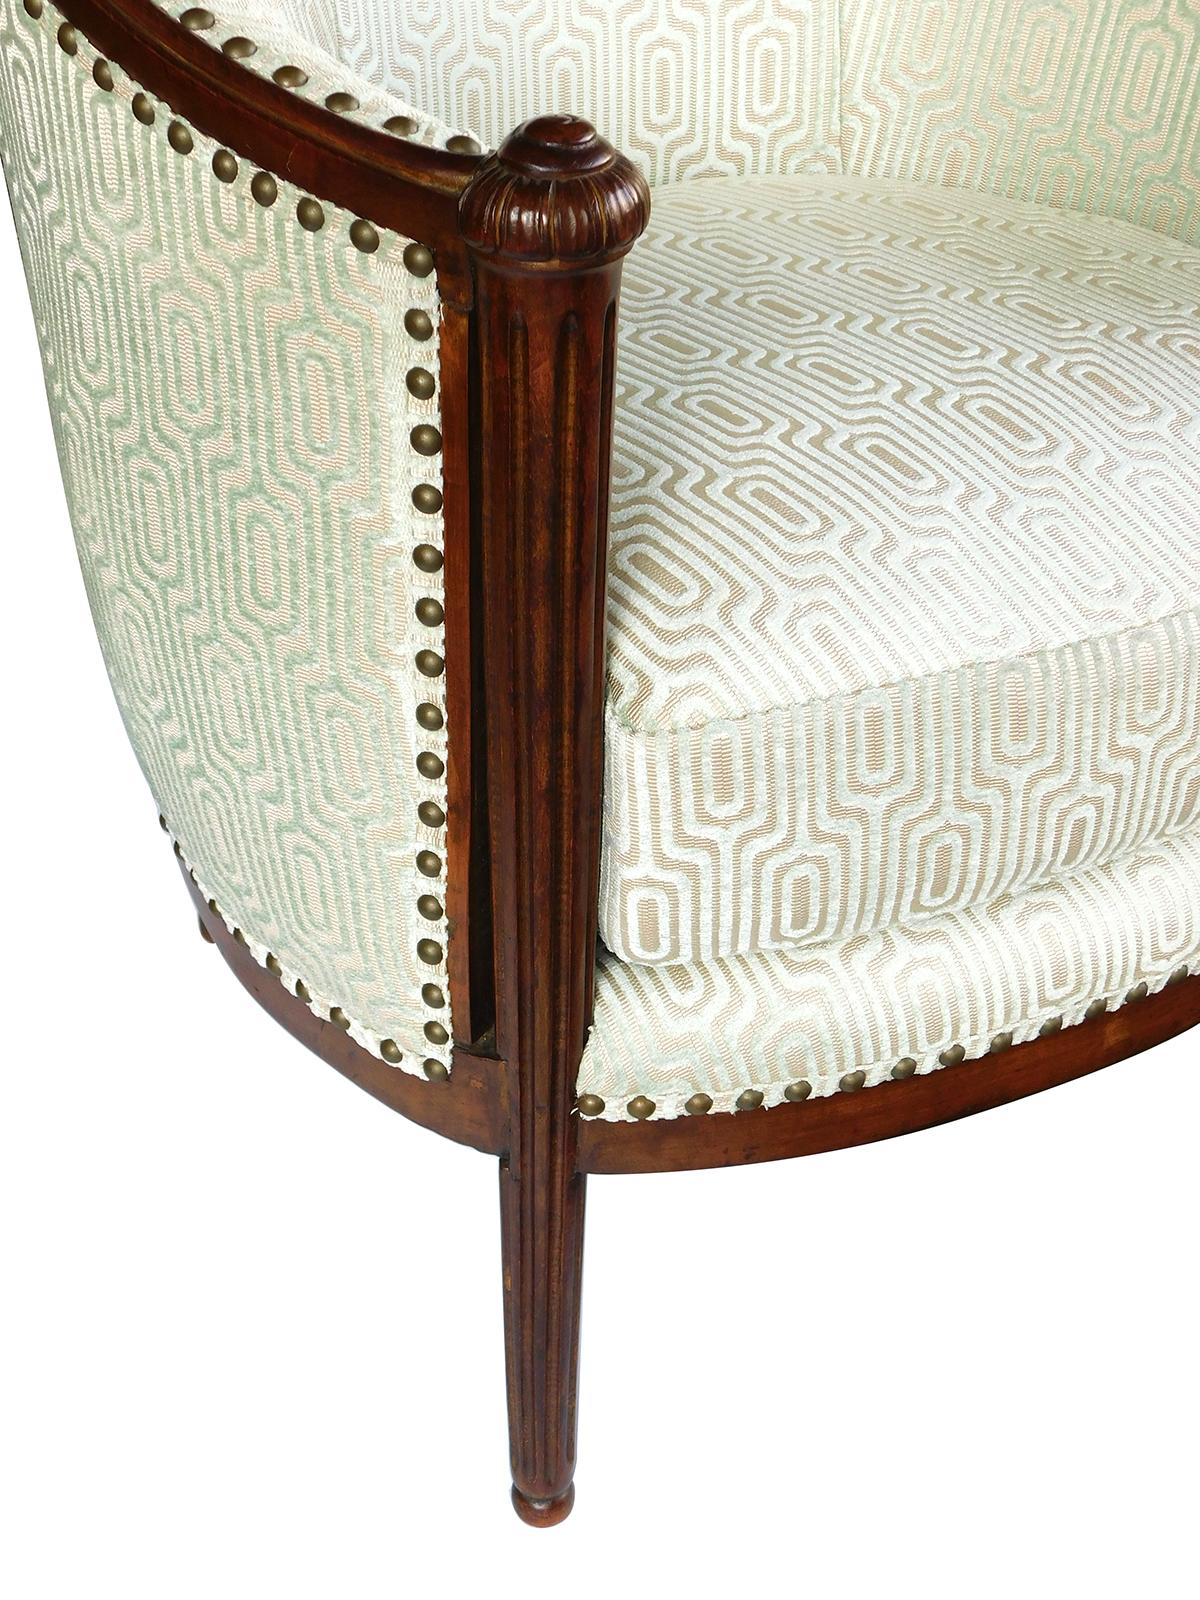 with sloping in-curved back over a loose cushion seat flanked by fluted supports capped with carved snail shells.